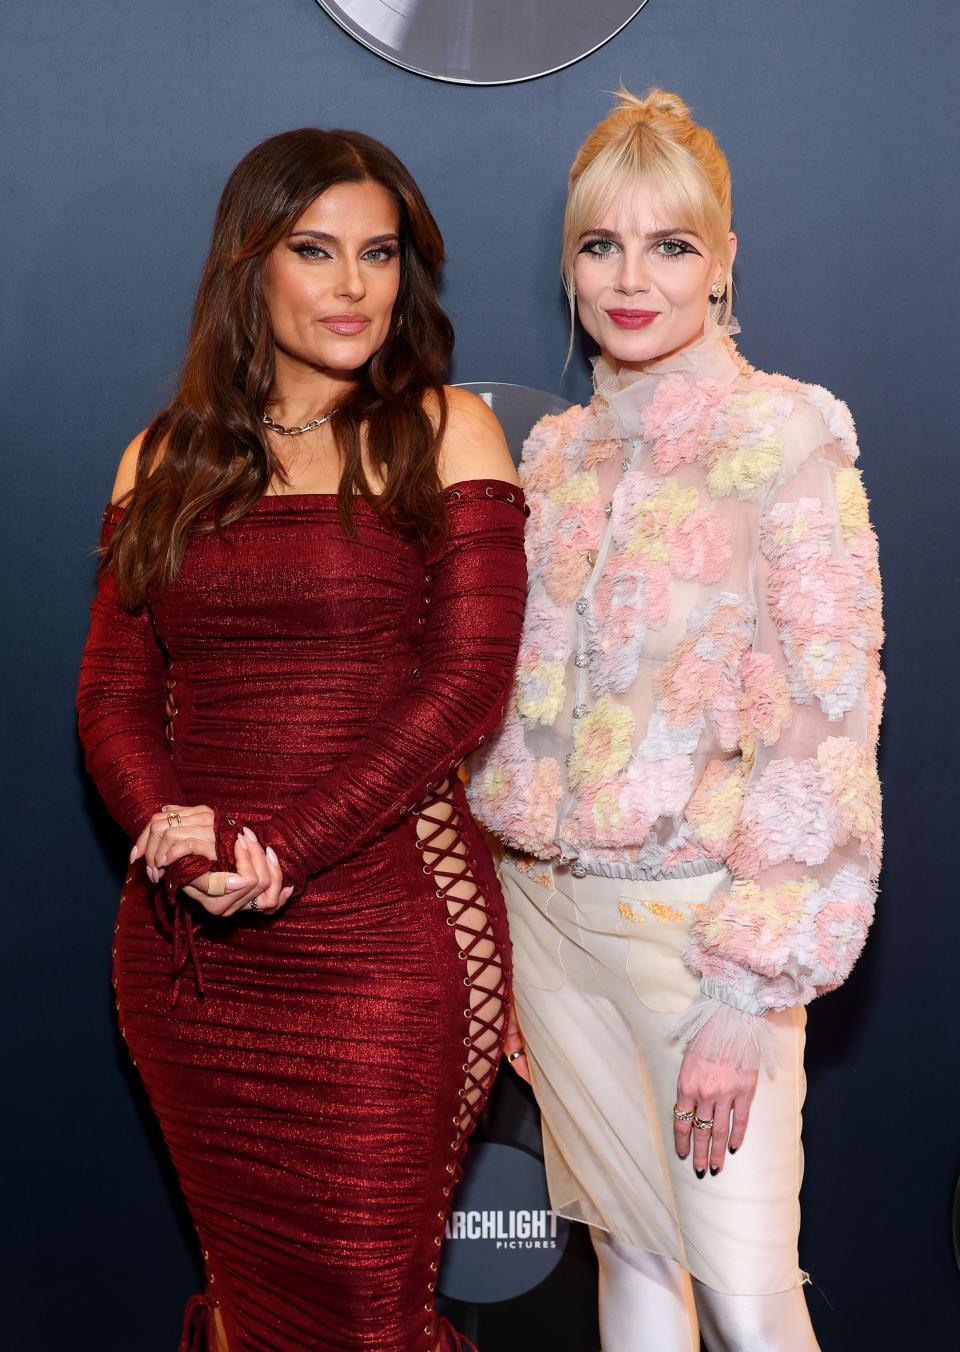 Nelly Furtado and Lucy Boynton attend Searchlight Pictures' "The Greatest Hits" premiere